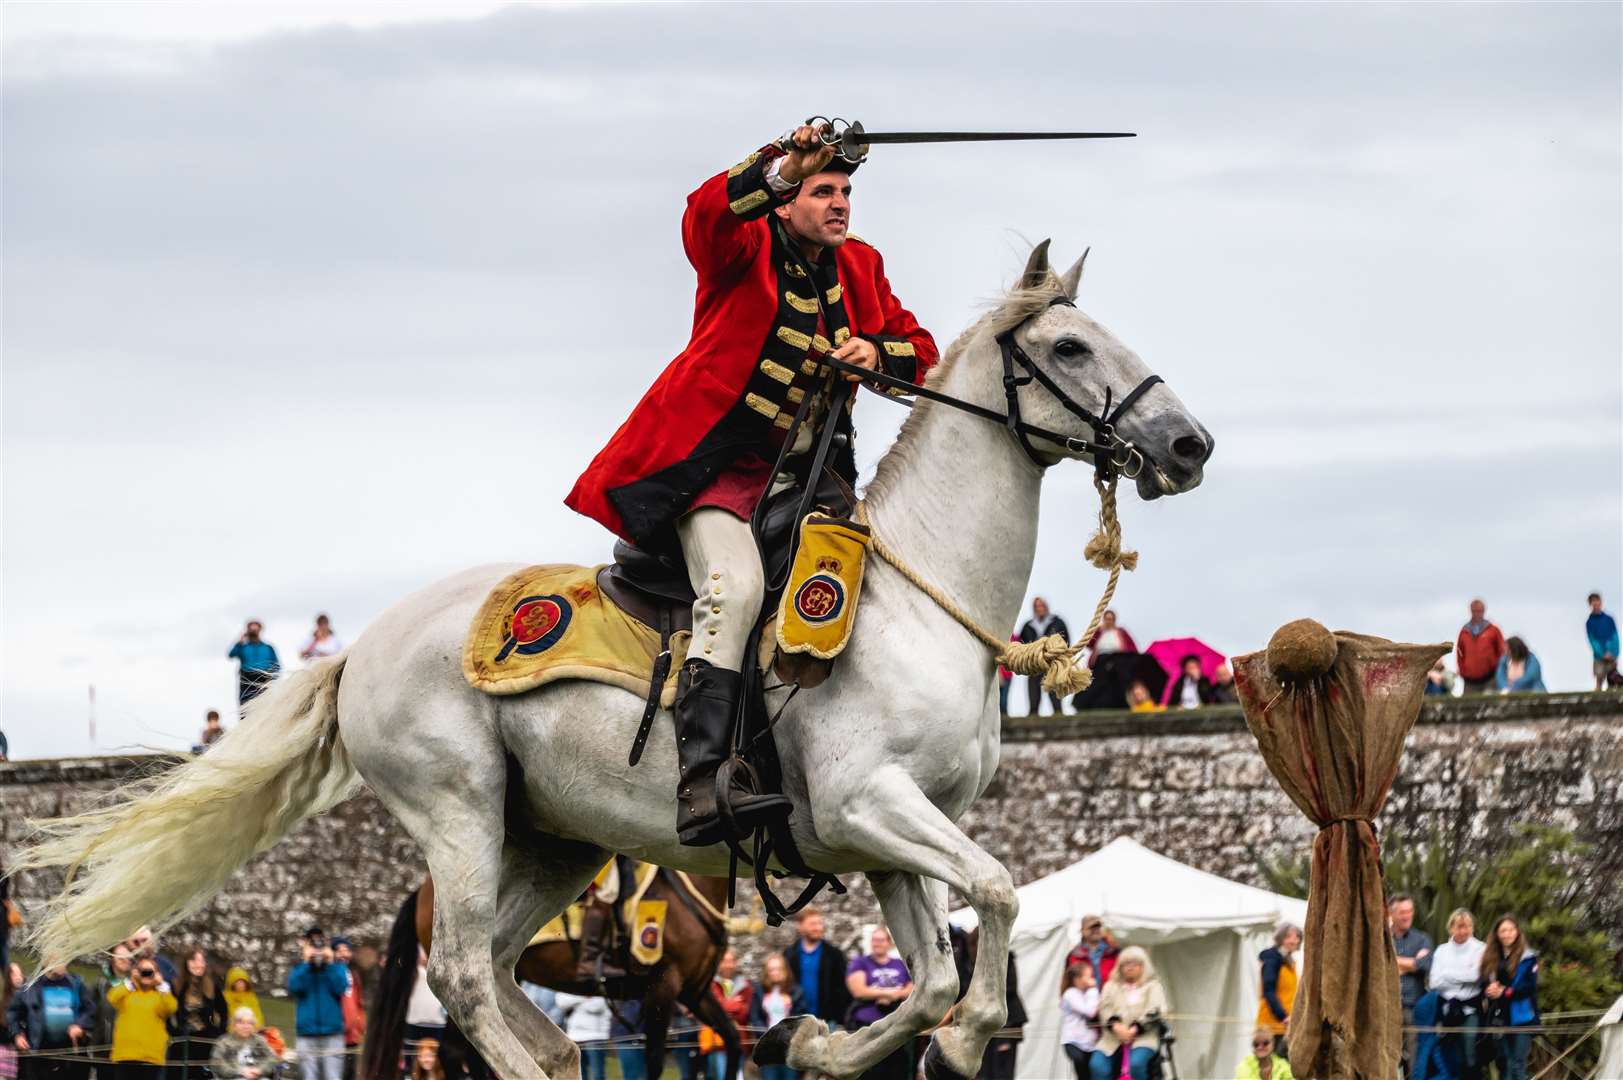 Re-enactors will bring Fort George to life with a living timeline depicting over two thousand years of Scottish history.